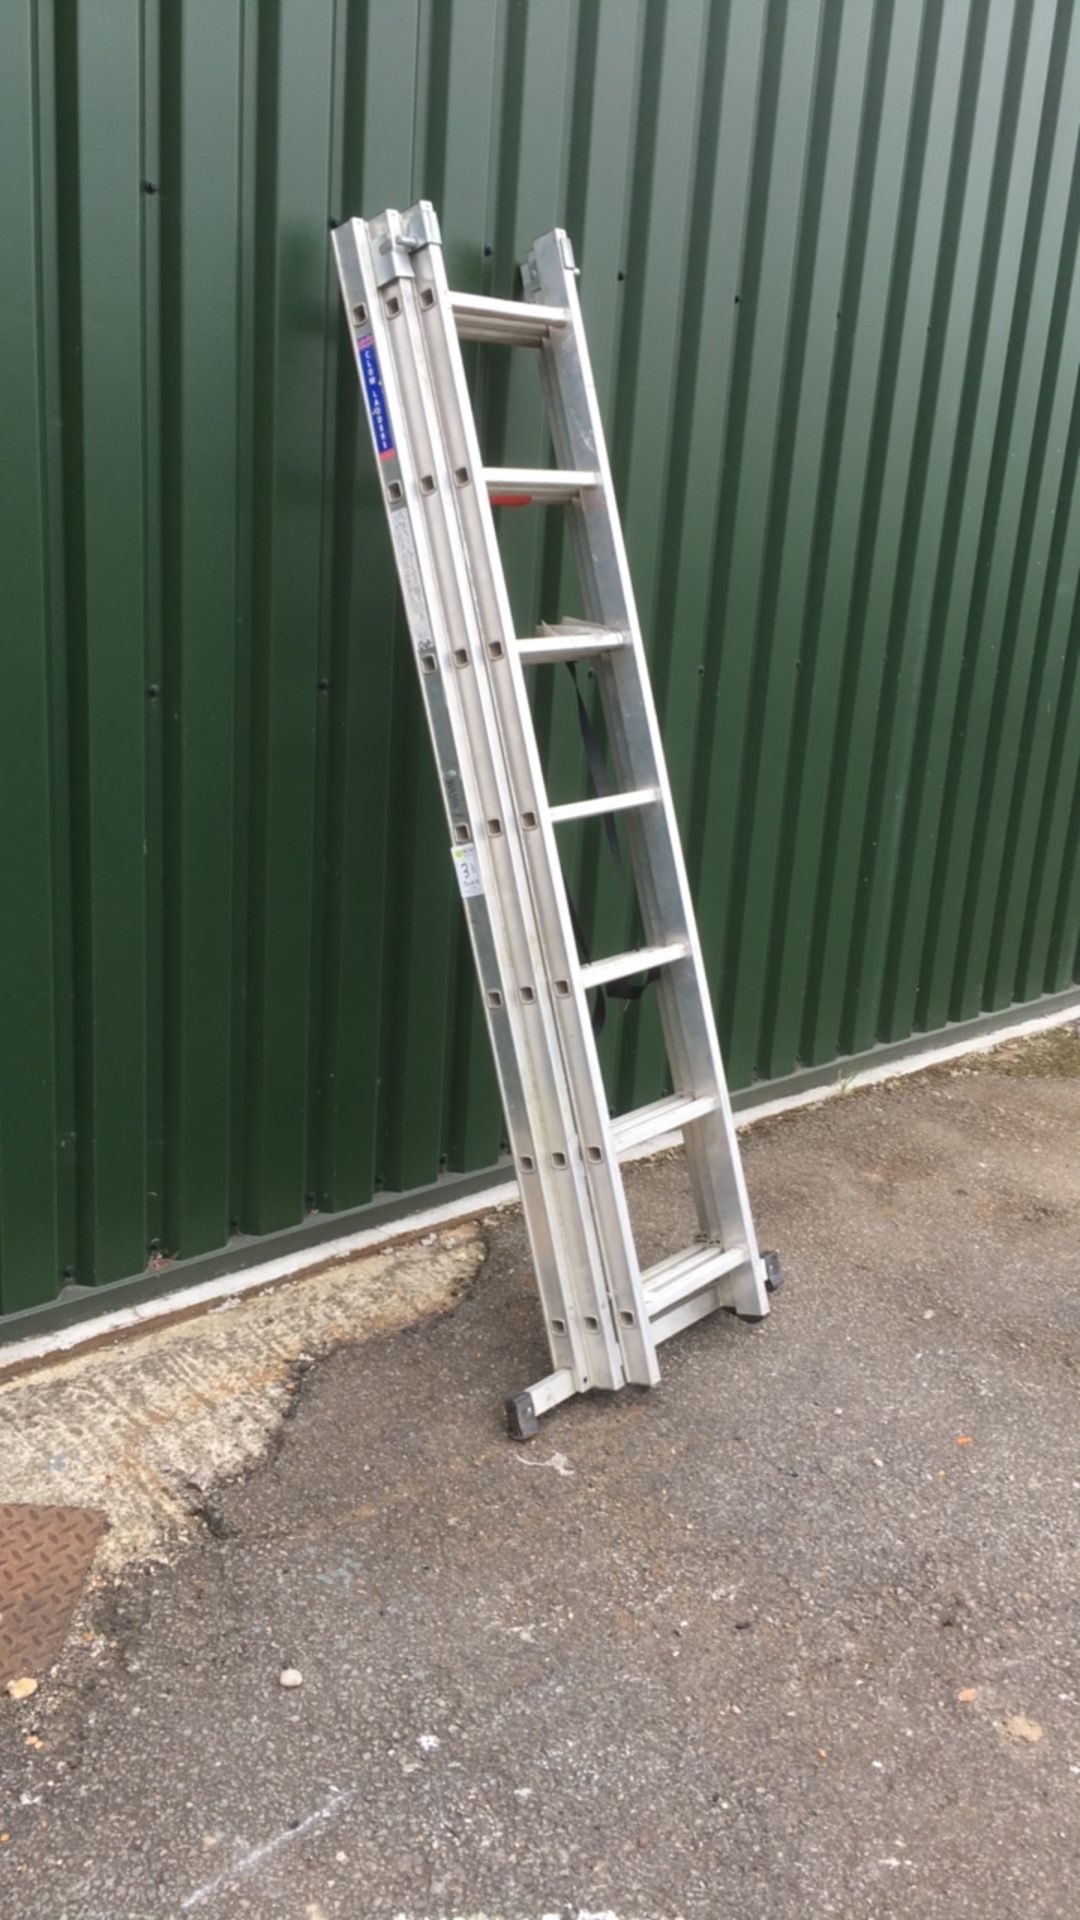 Clow 3 section ladder (A706438) - Image 2 of 5